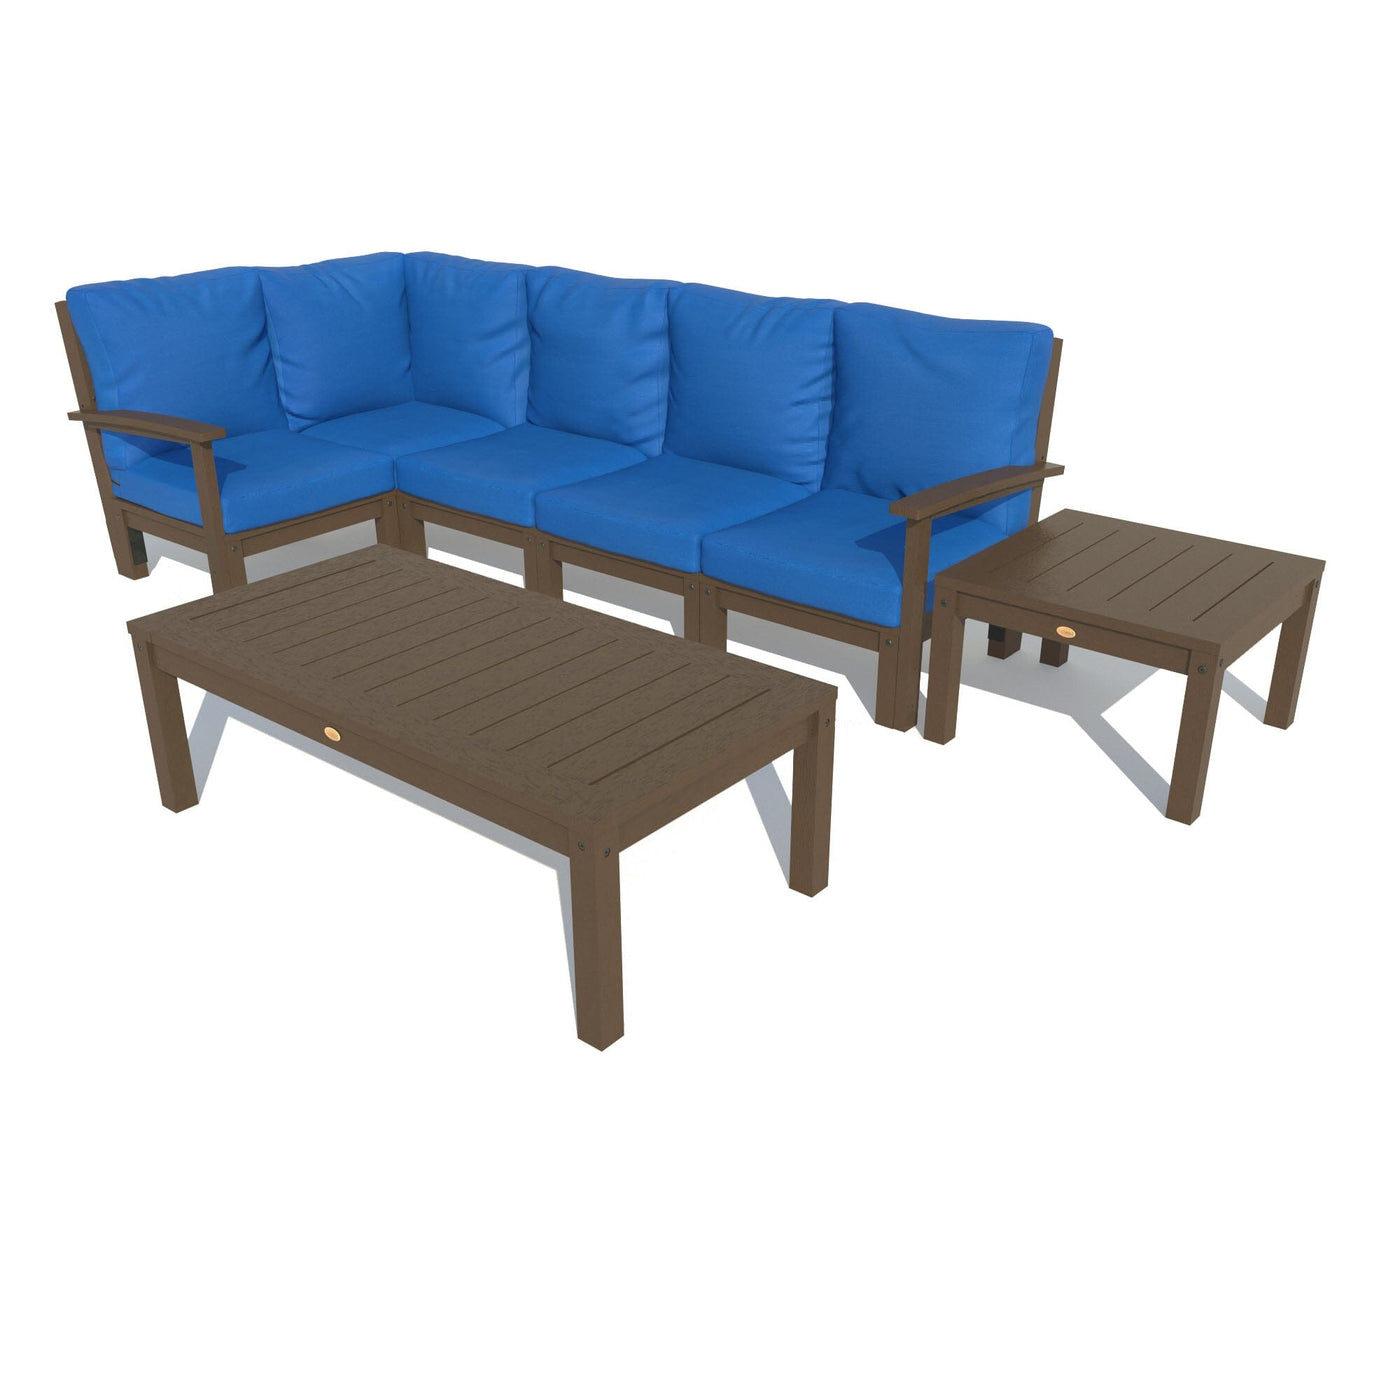 Bespoke Deep Seating: 7 Piece Sectional Set with Conversation and Side Table Deep Seating Highwood USA Cobalt Blue Weathered Acorn 